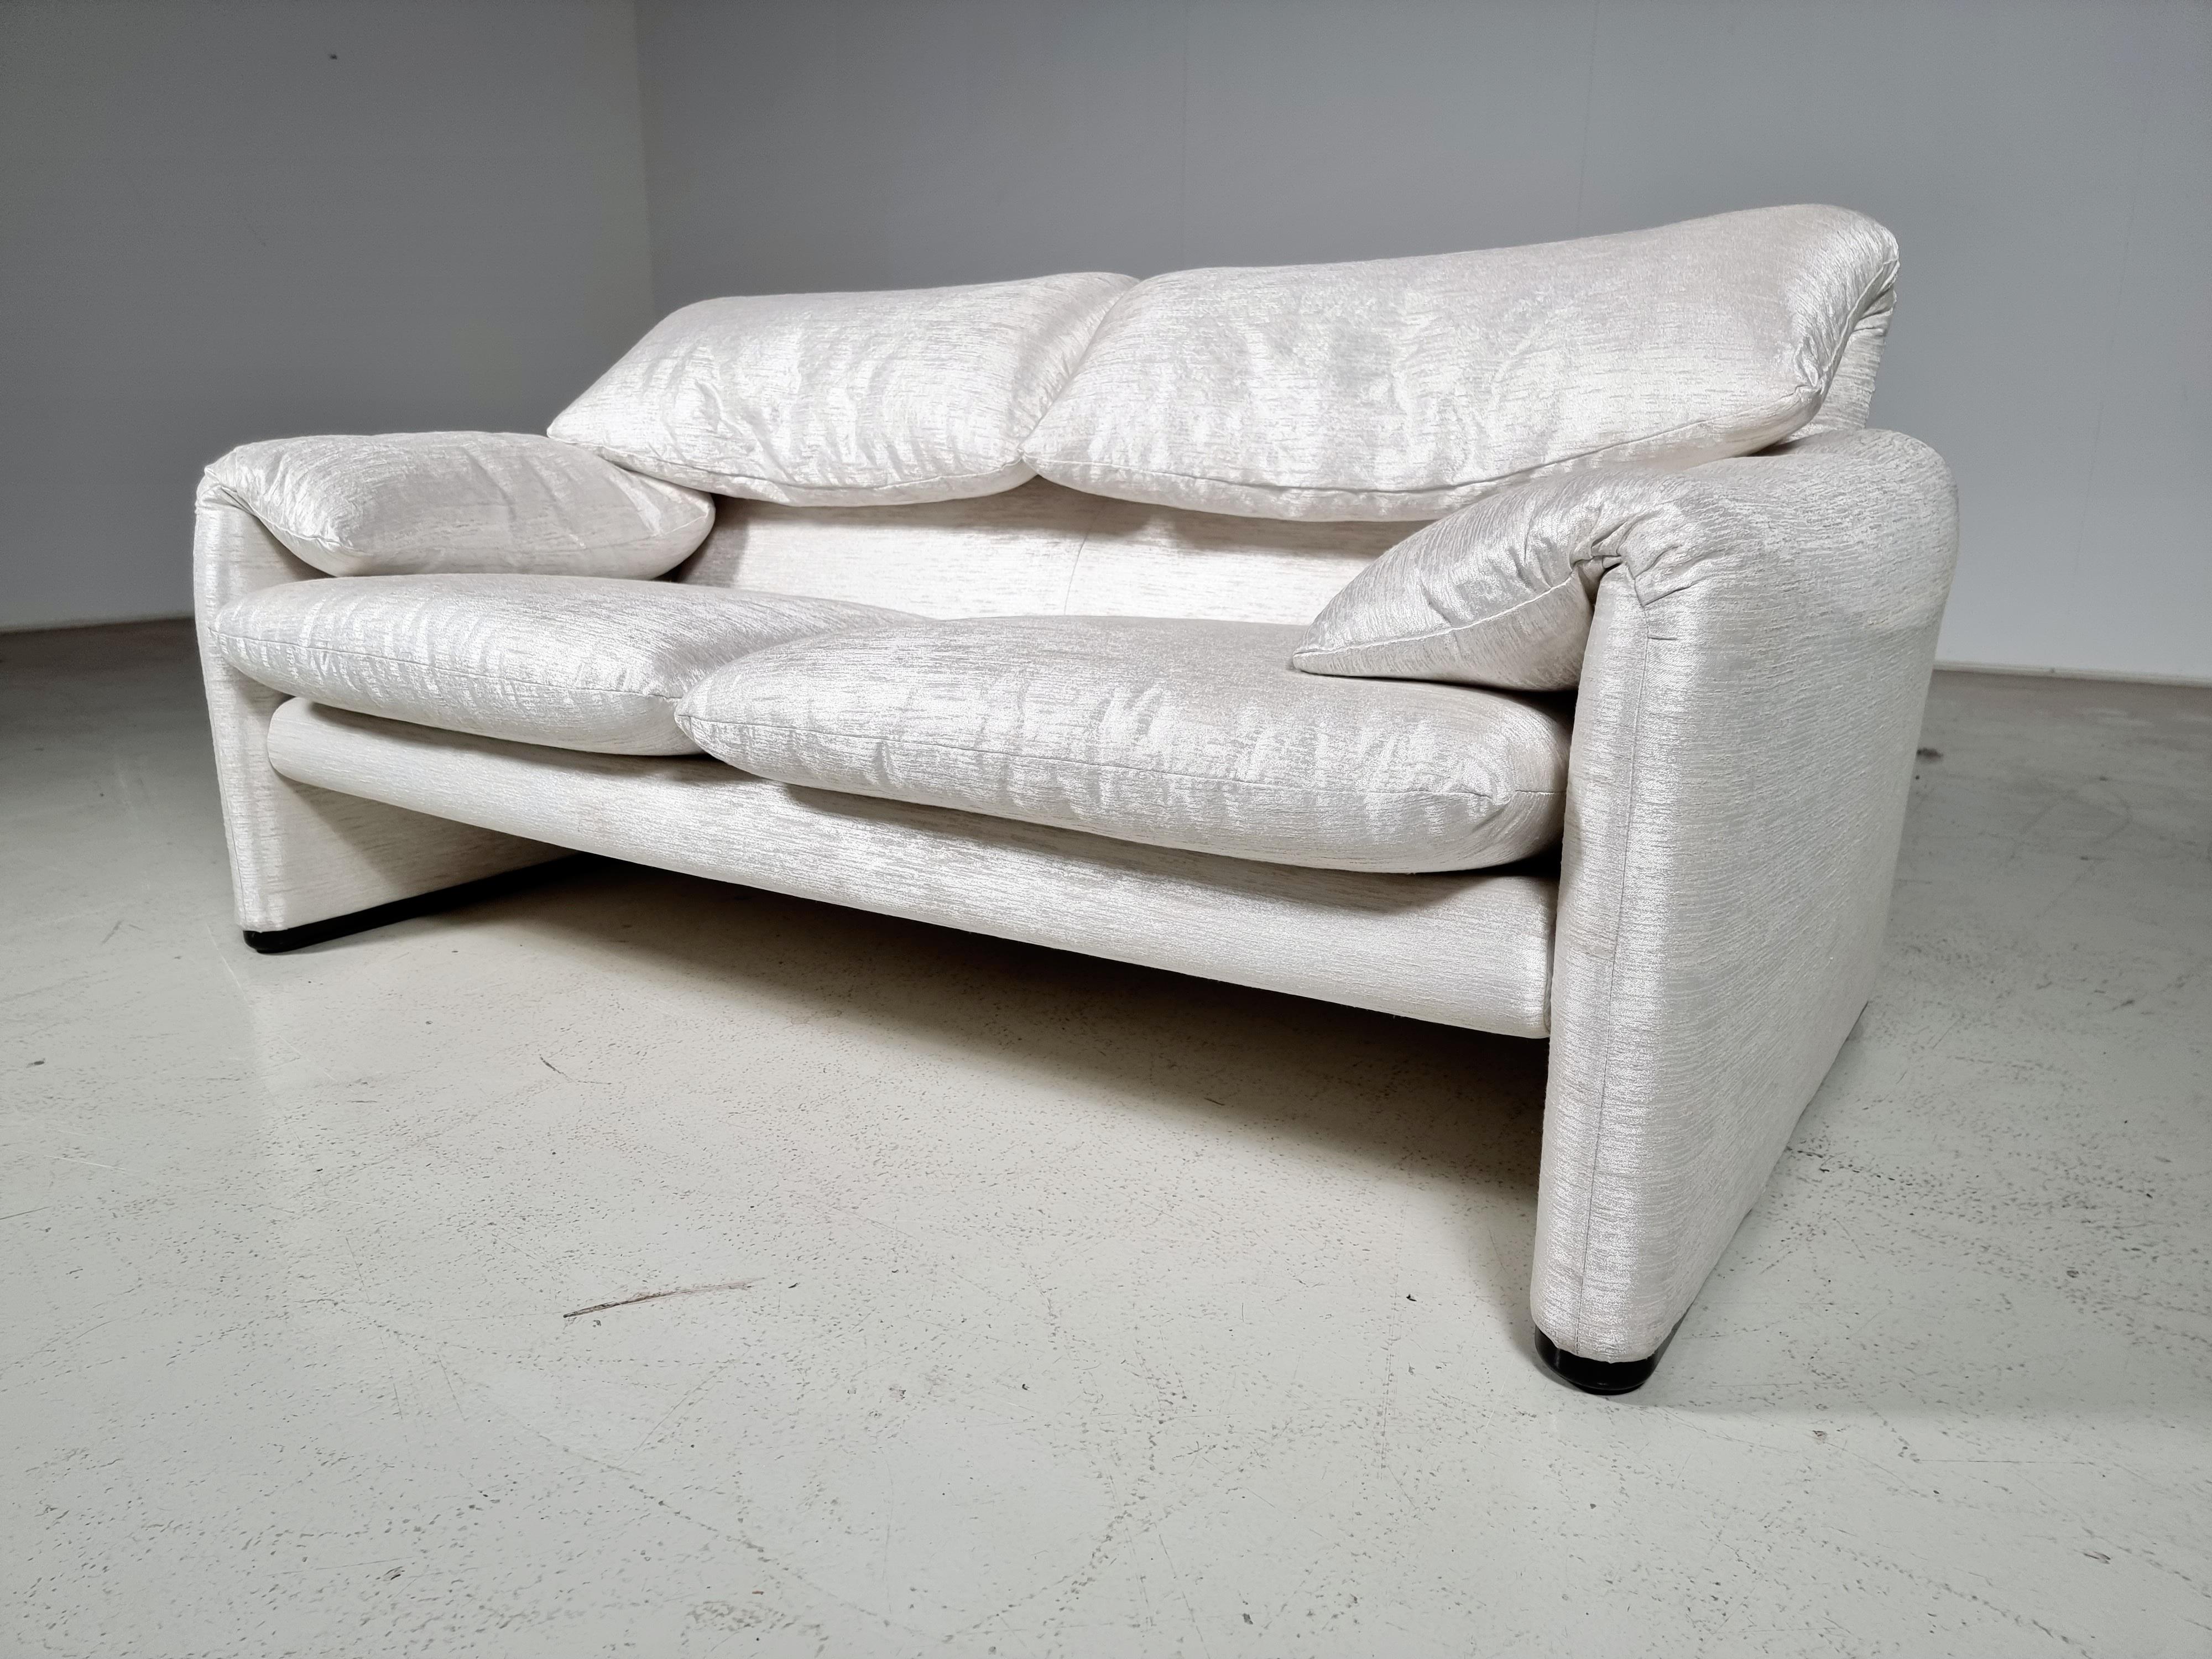 This Maralunga sofa was designed by Vico Magistretti for Cassina in 1973. It is an original version of the seventies. Reupholstered in a silk/cotton Zinc fabric. With steel structure. The backrests can be raised or lowered for total comfort. This